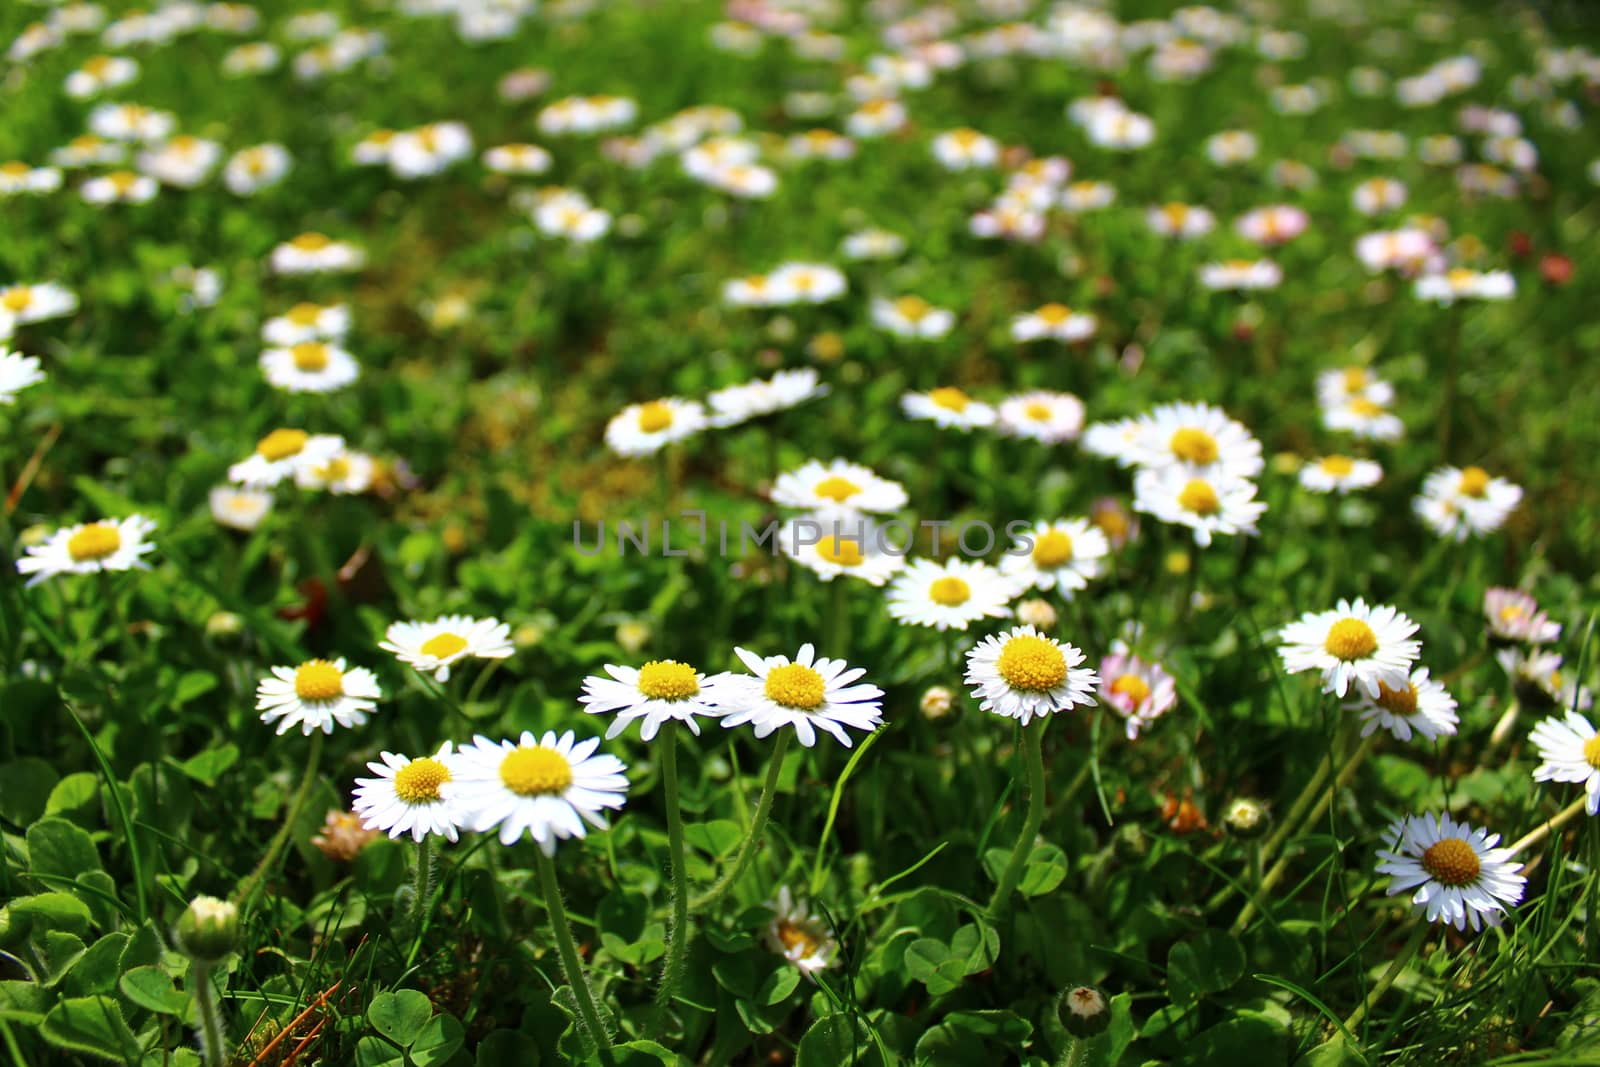 meadow with daisies by martina_unbehauen